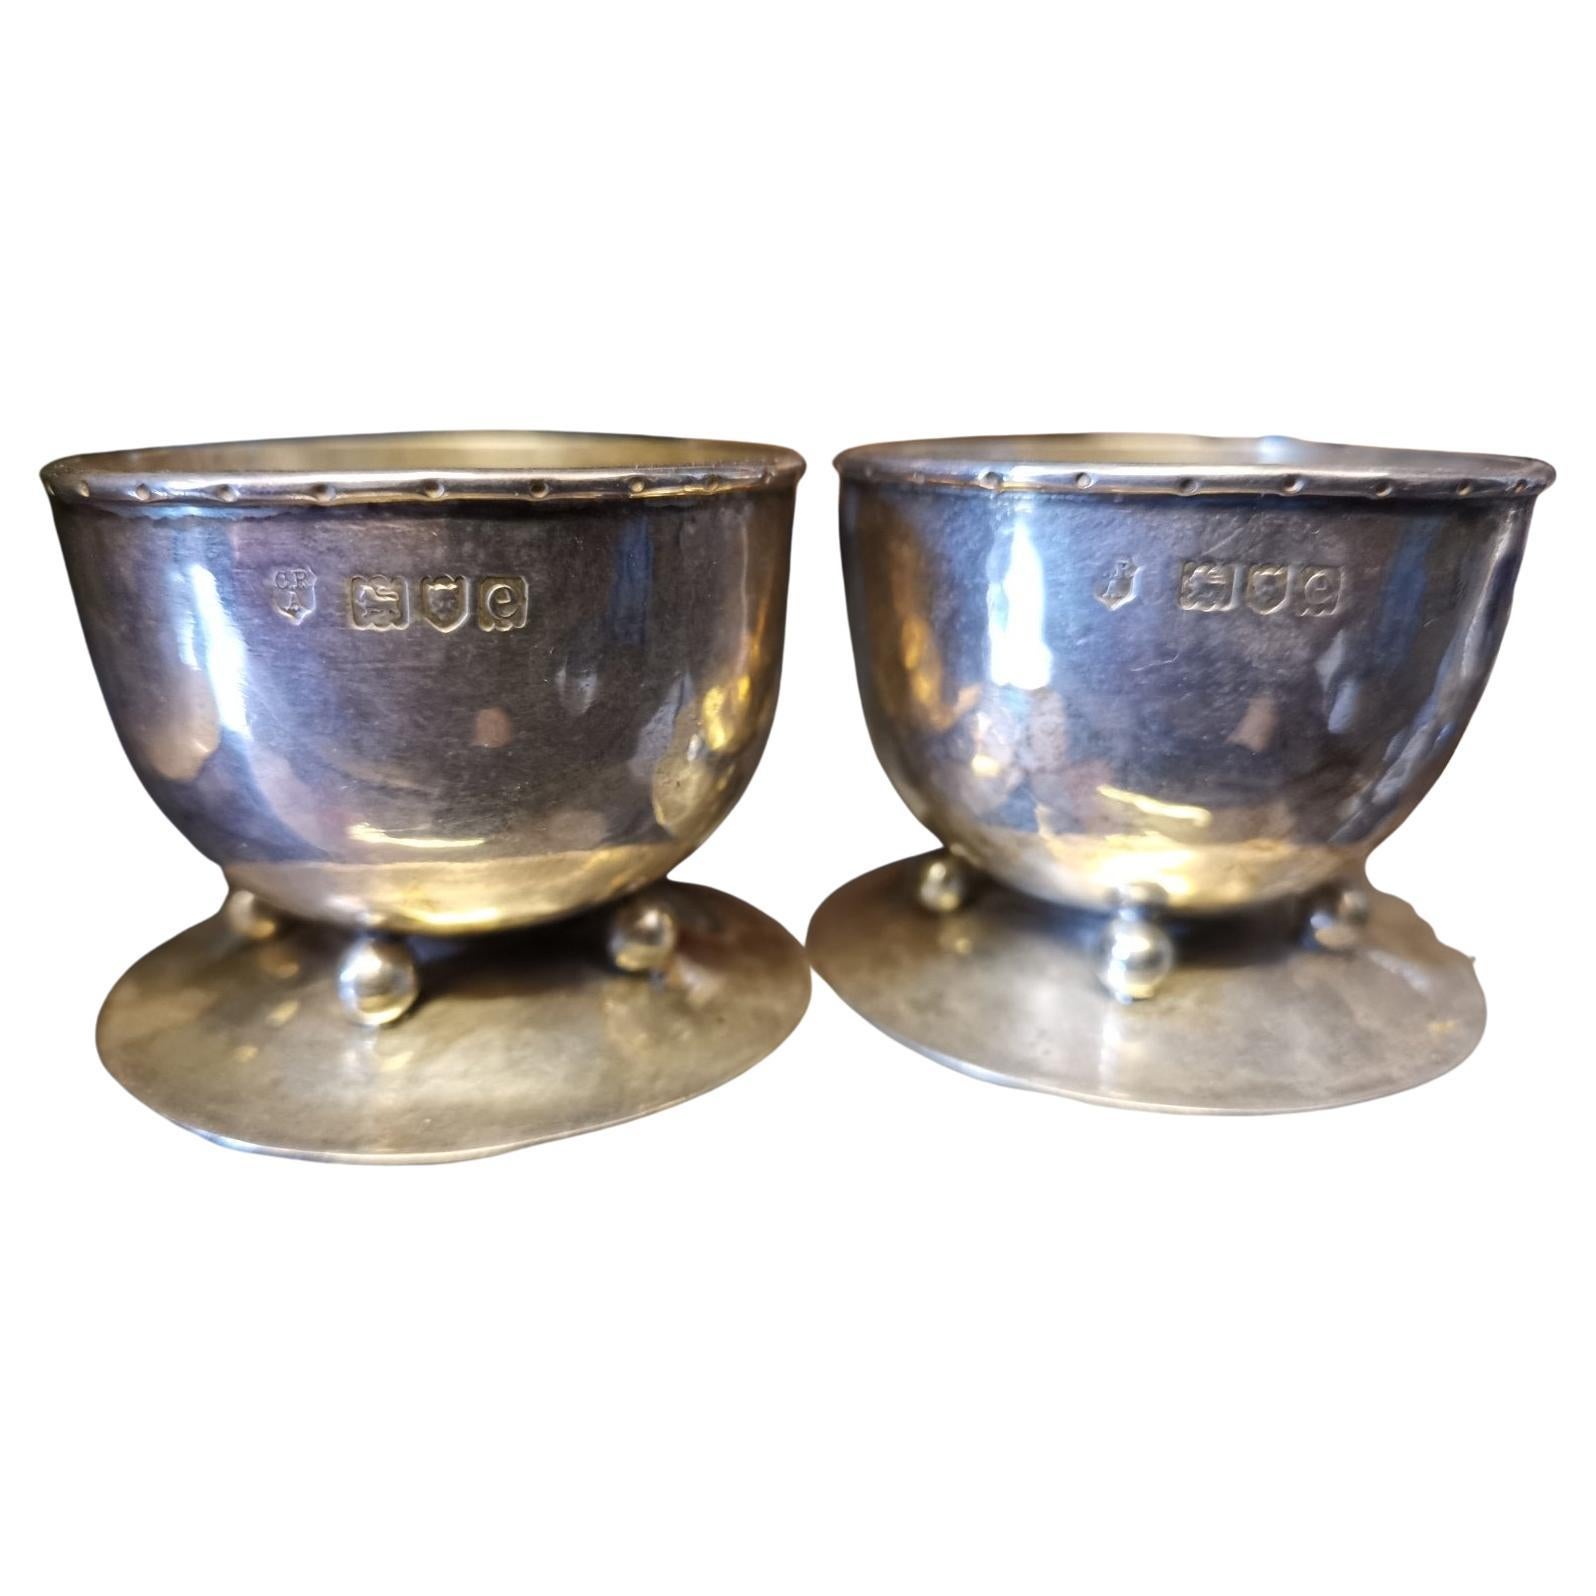 C R Ashbee GOH. A Rare Pair of Arts & Crafts Hand-Crafted Hammered Silver Salts. For Sale